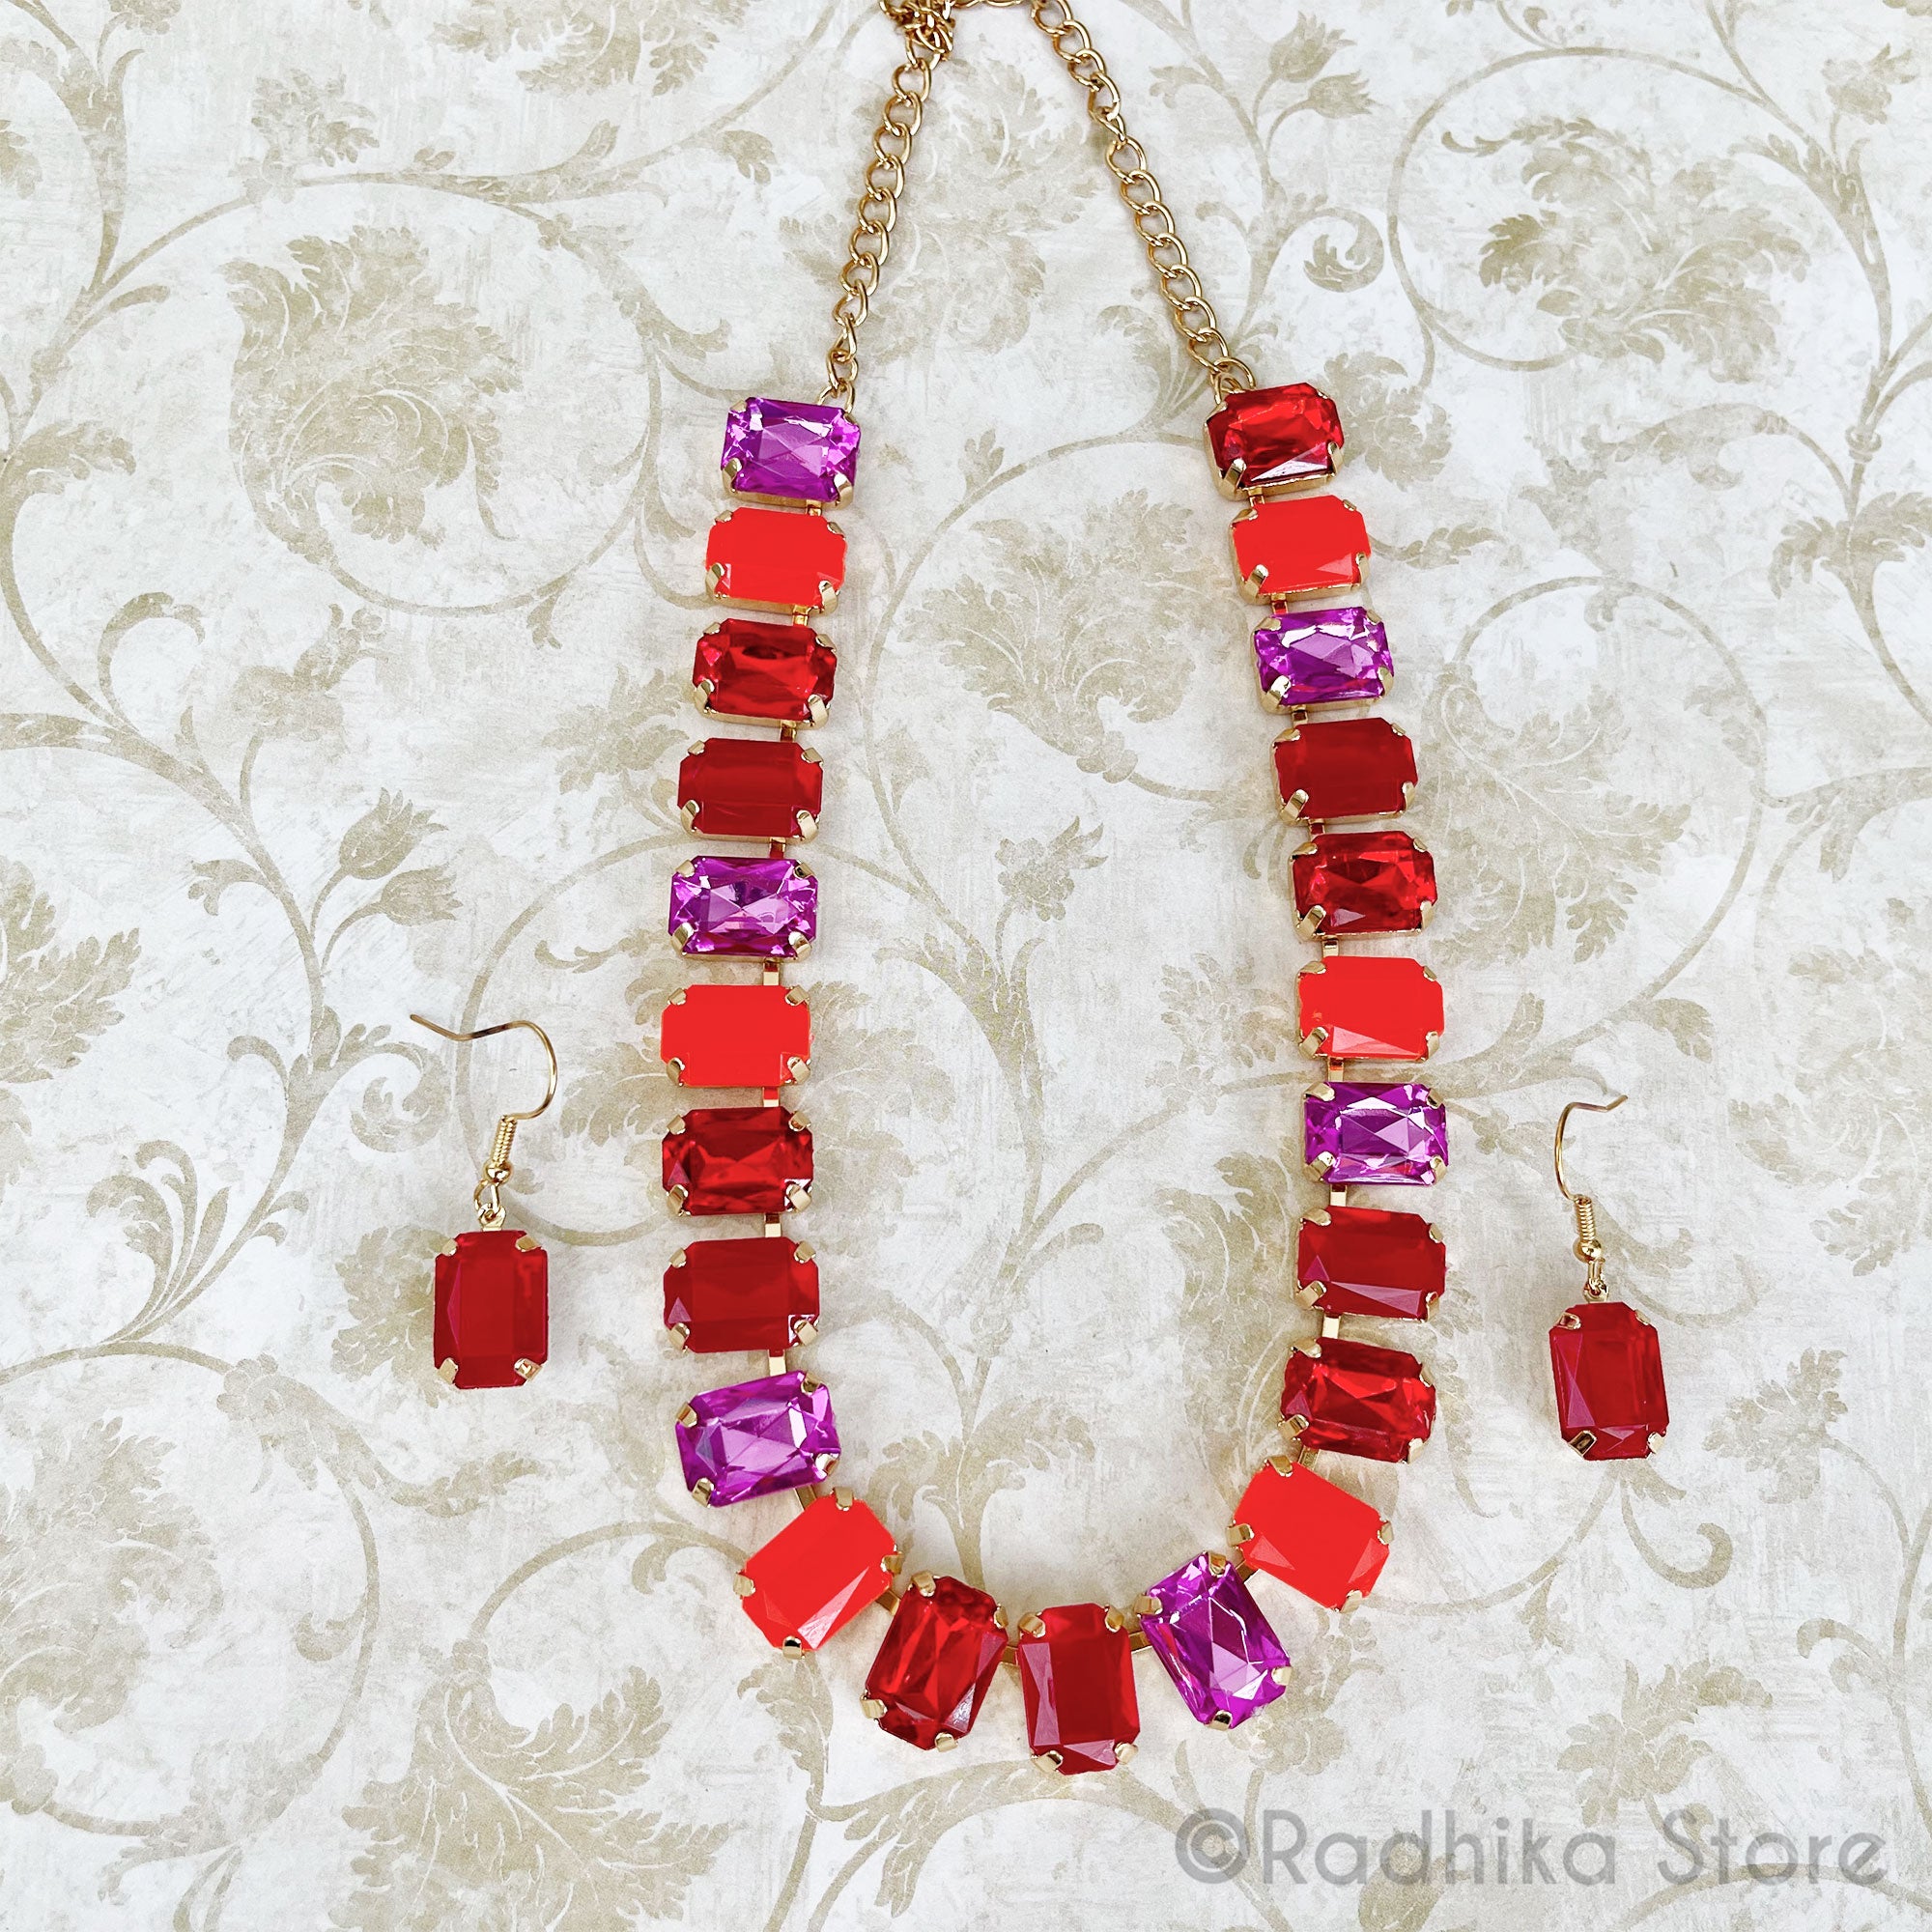 Emerald Cut-Reds and PUrple Color Crystals-Rhinestone Deity Necklace - And Earring Set